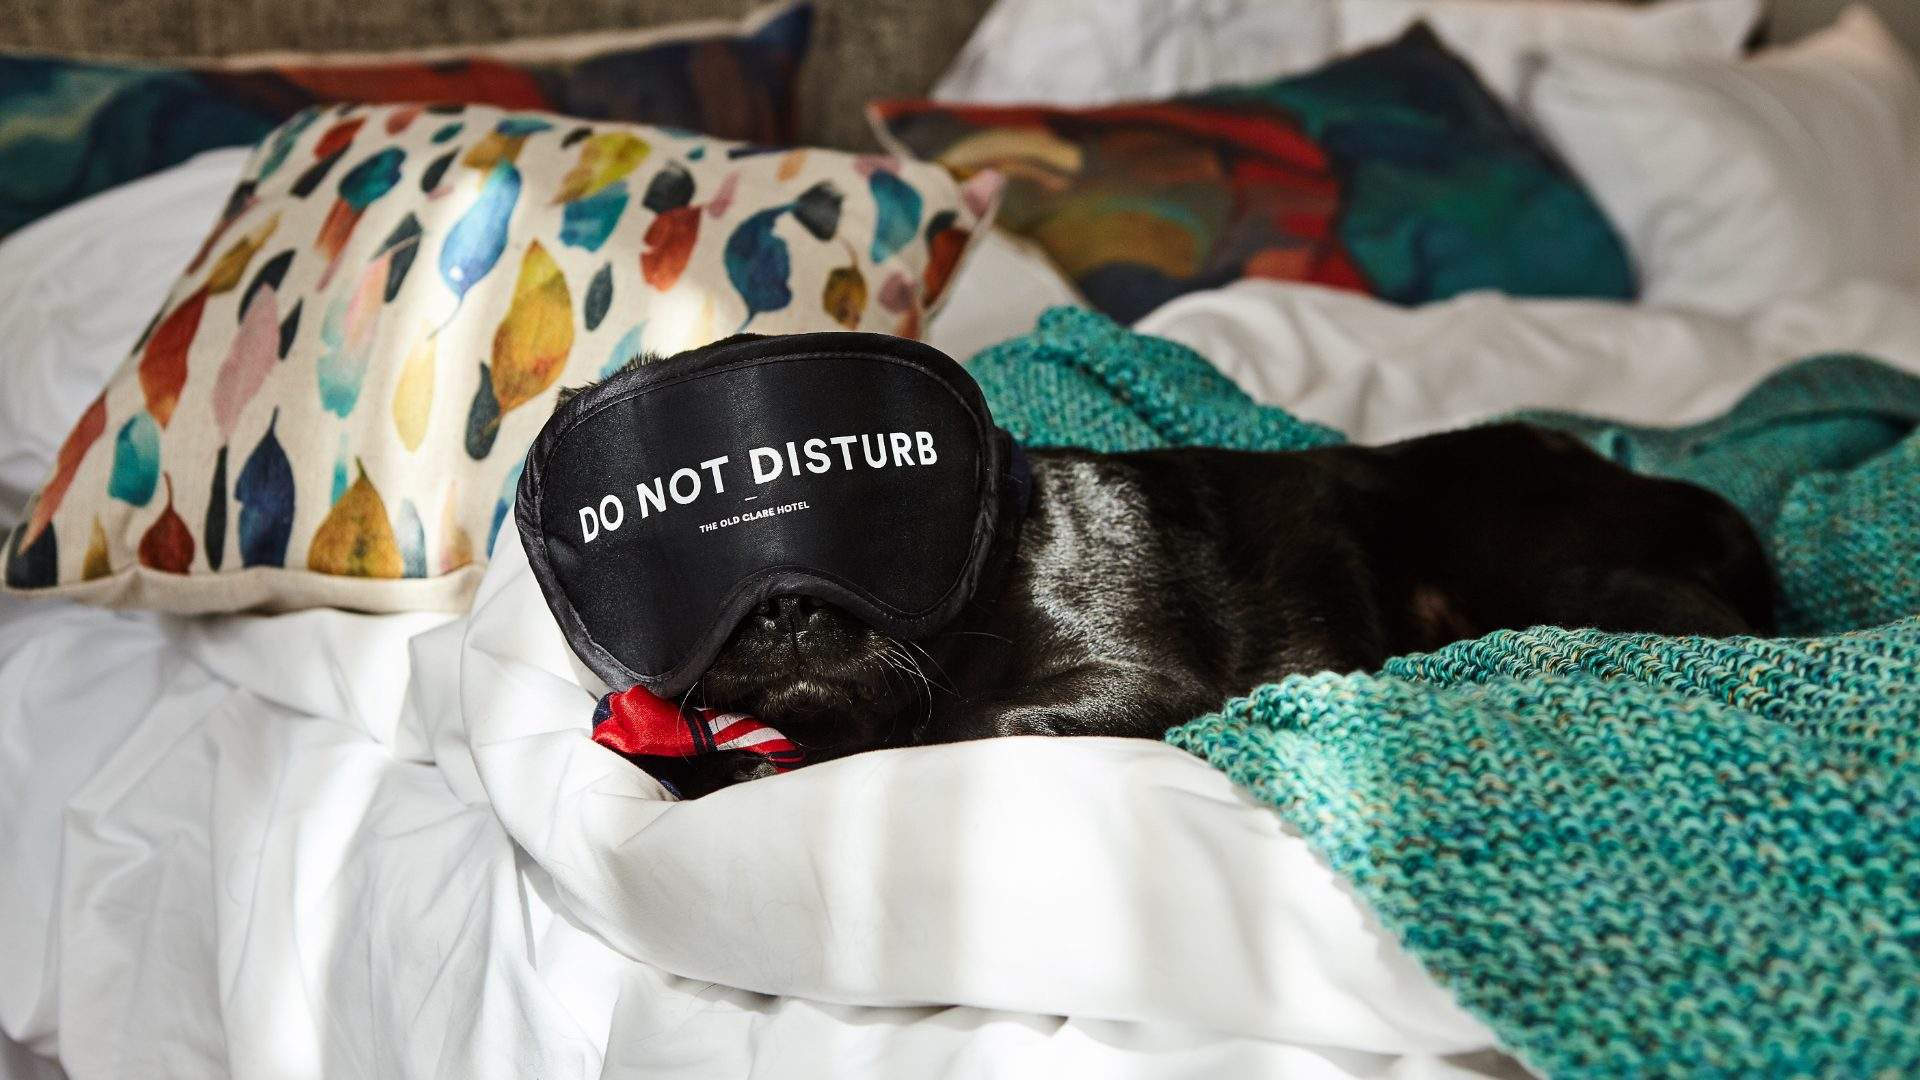 Sydney's Old Clare Hotel Now Has Pet-Friendly Suites Complete with 24-Hour Room Service